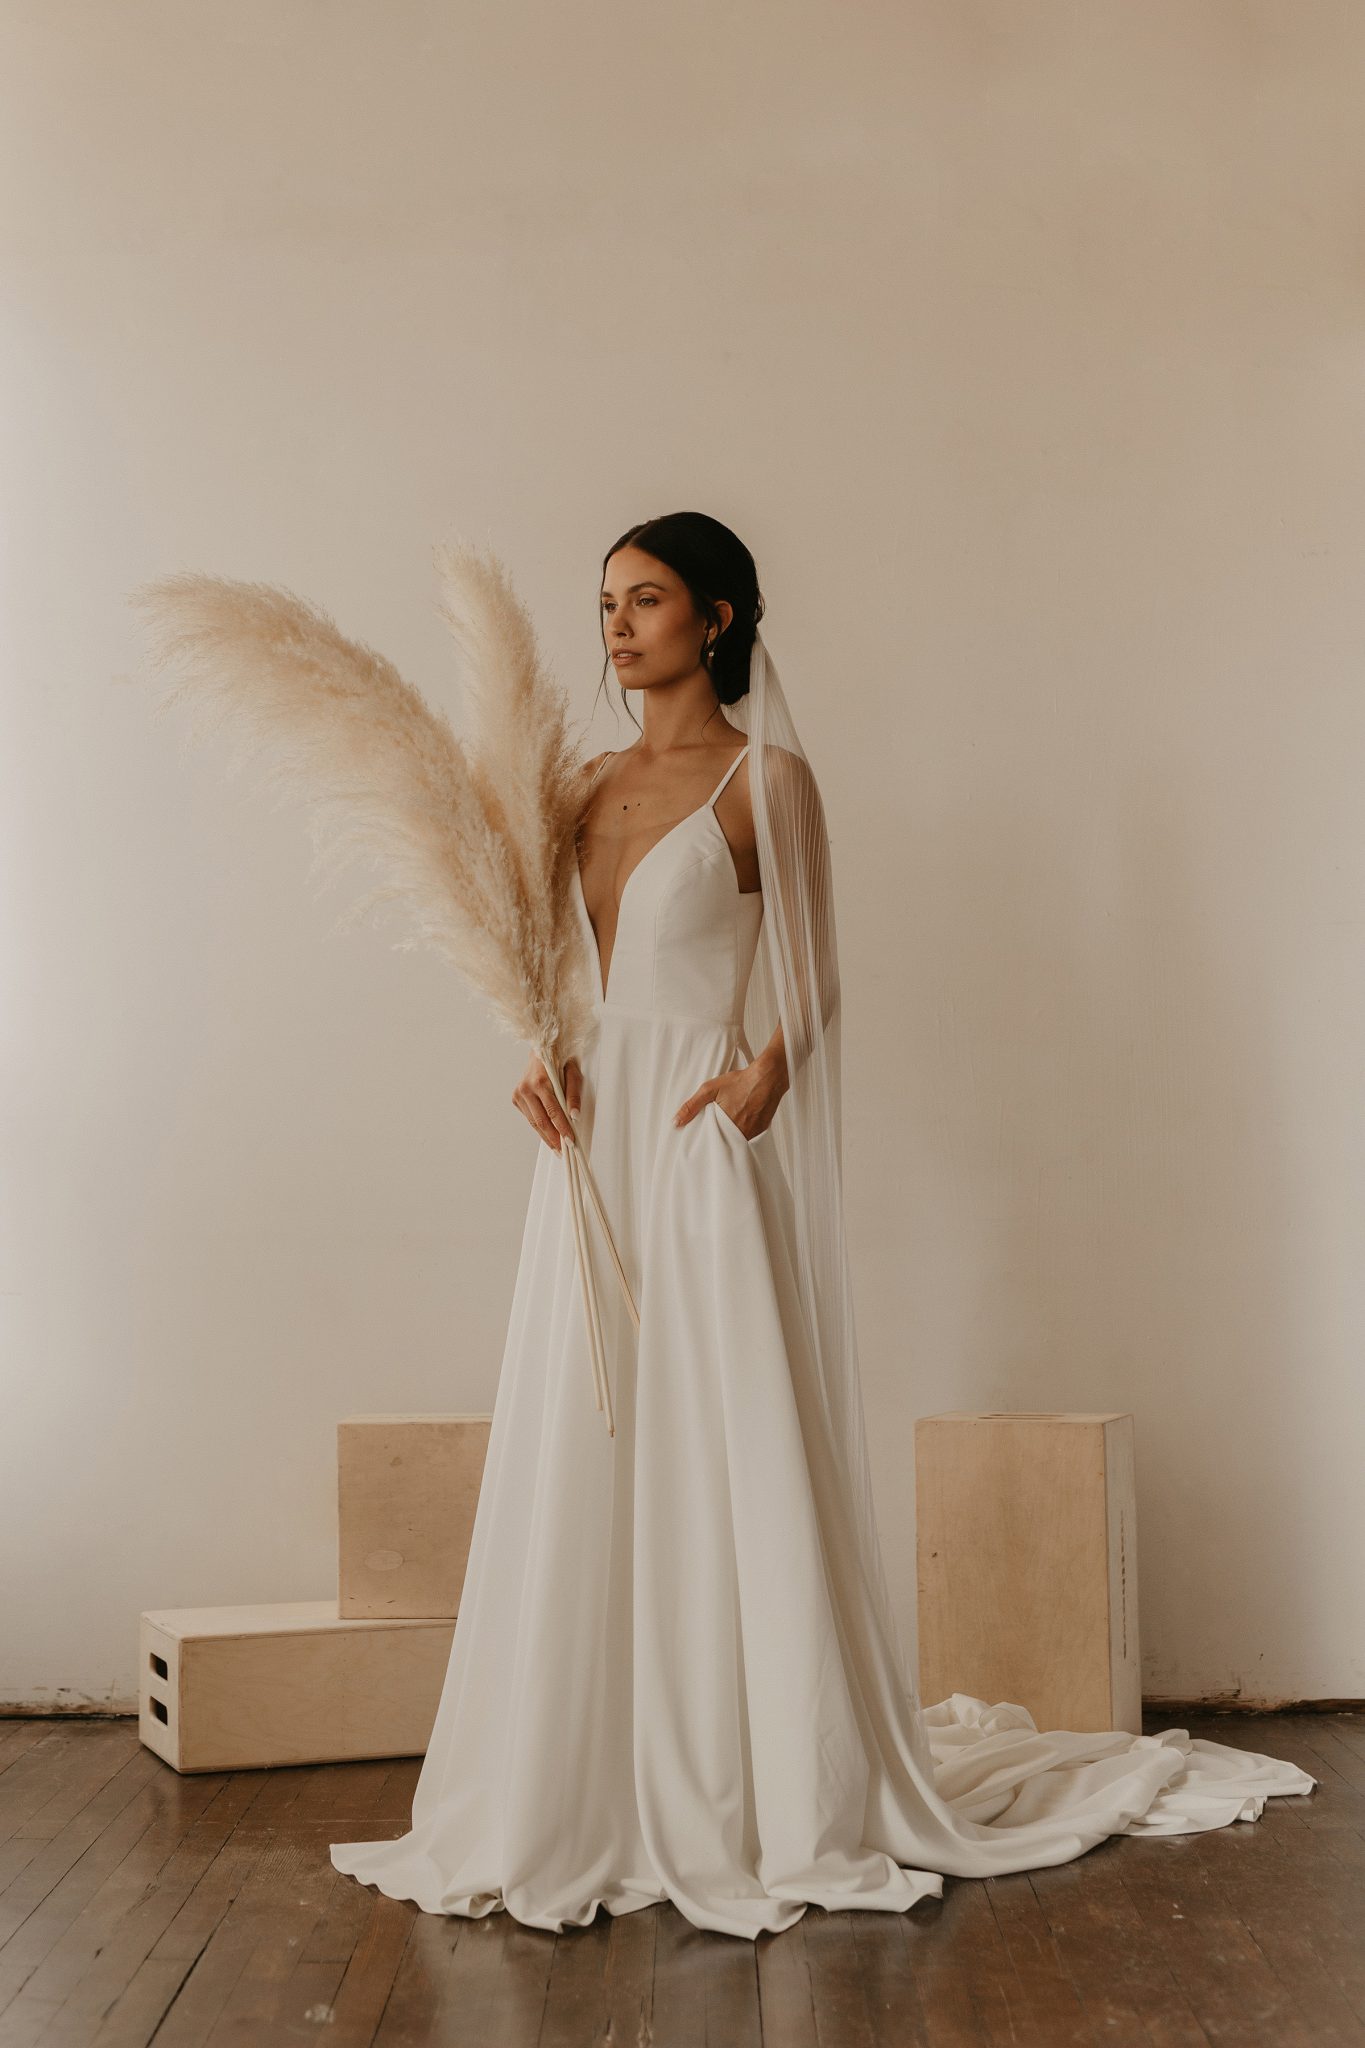 Bridal Minimalism Feature on Bronte Bride: Delica Bridal Shares All About New Bridal Trends & Dress Shopping During Covid, wedding dress shopping, boho bridal